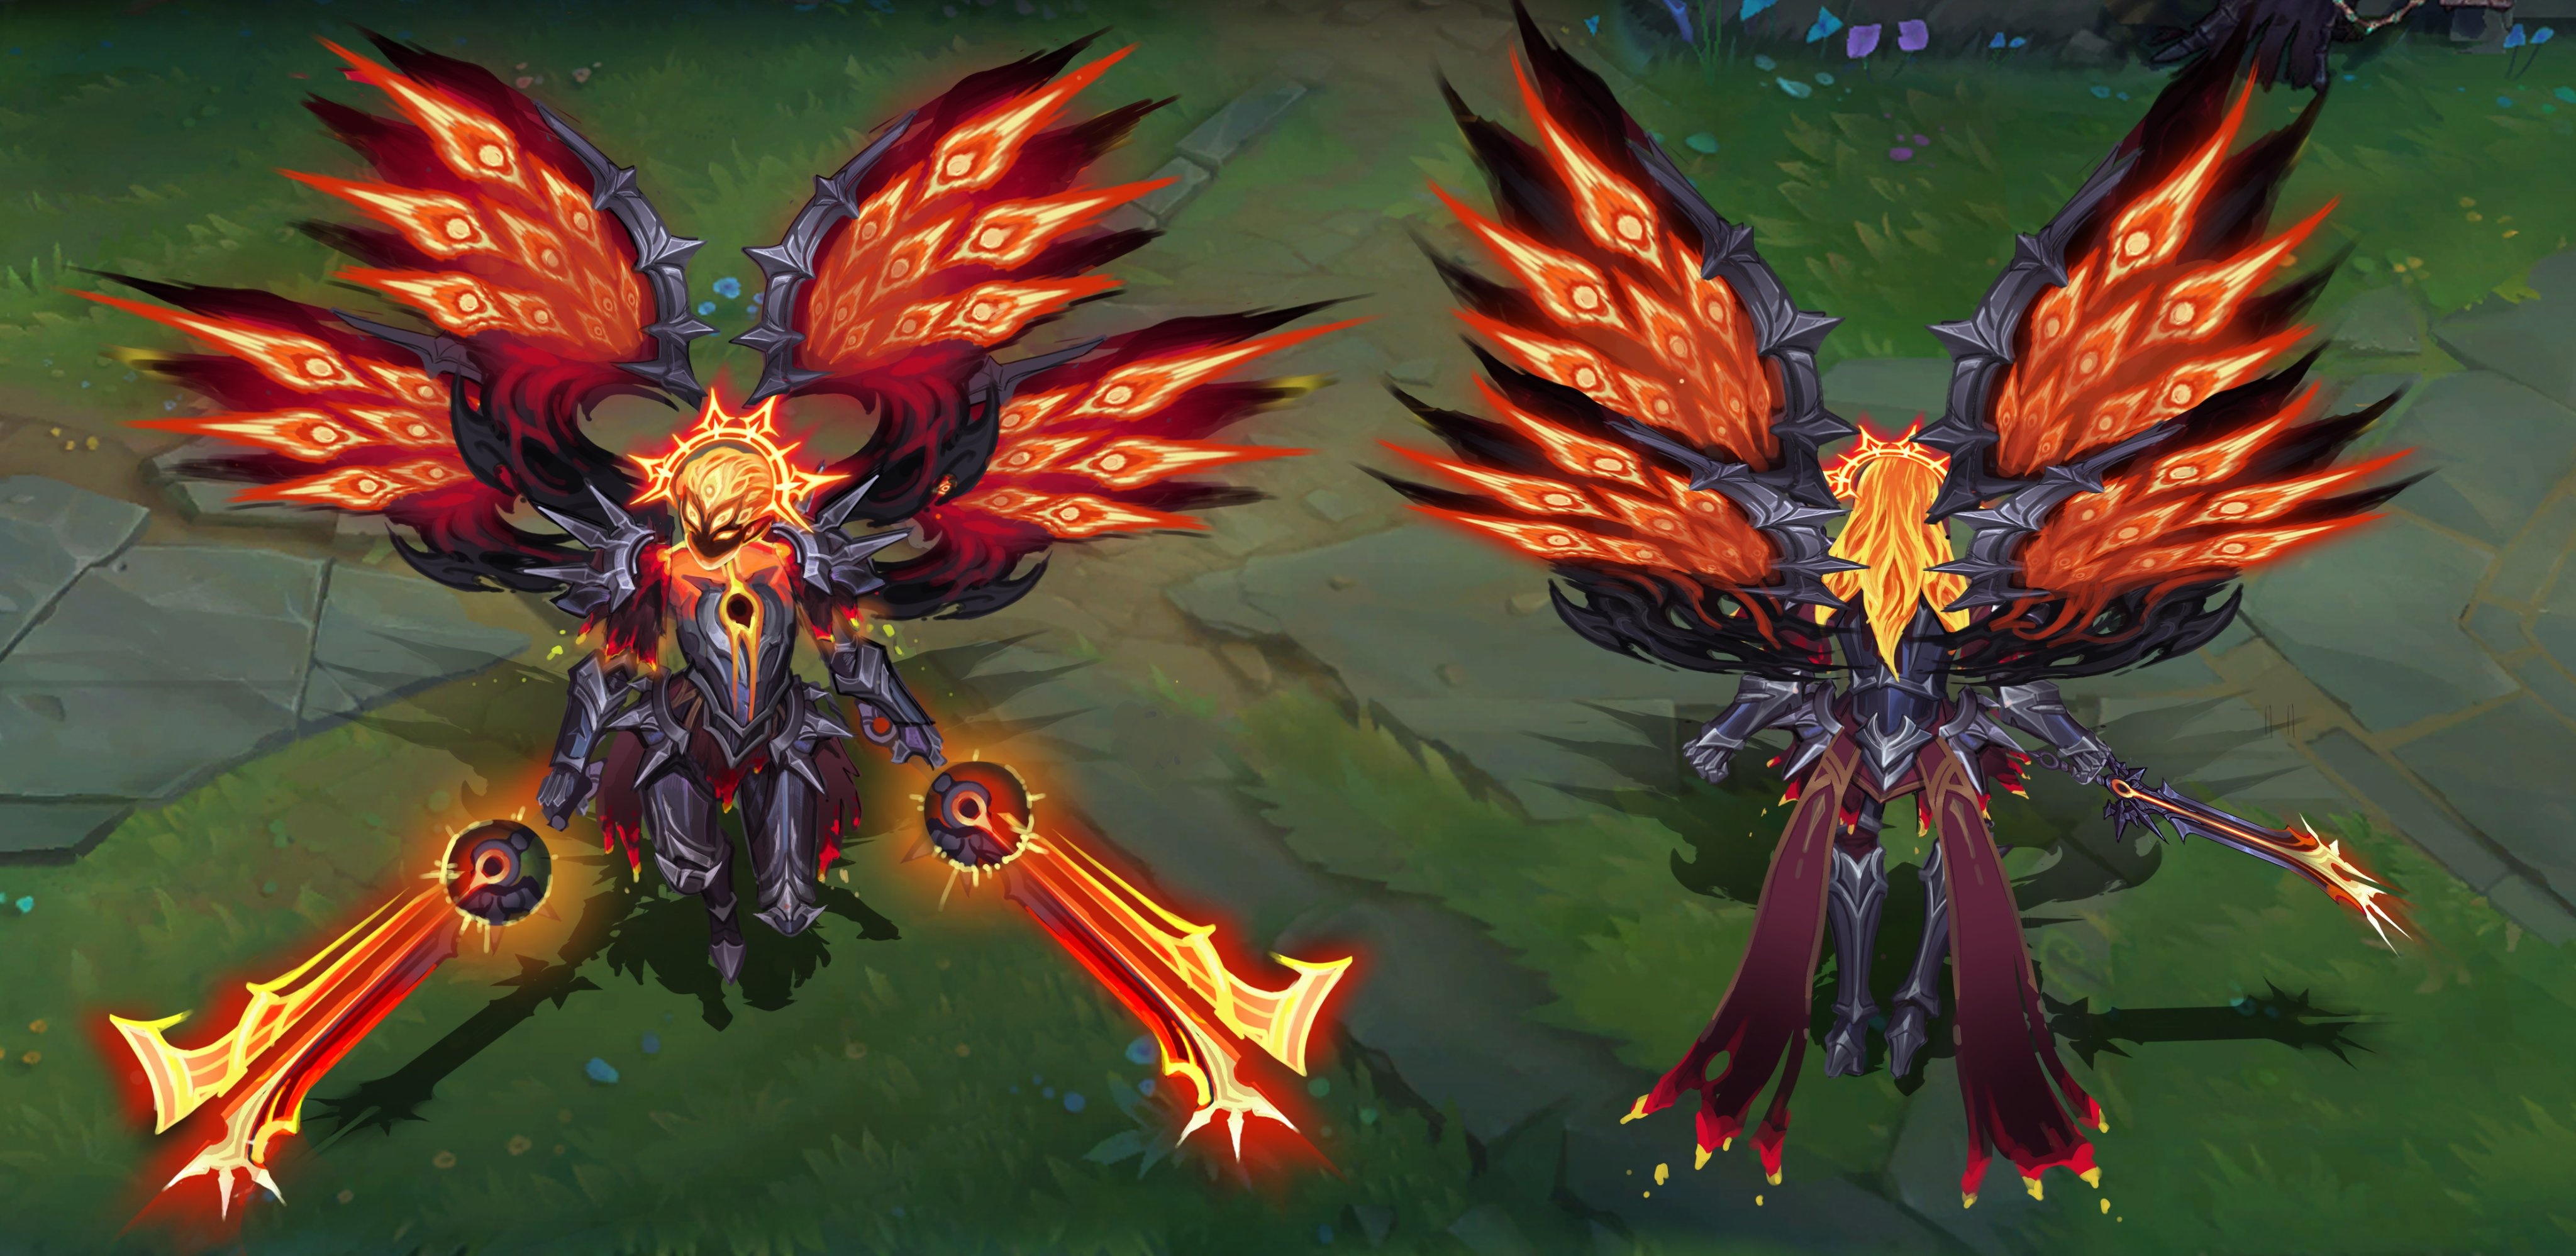 Here Is The Final Concept Art For Sun Eater Kayle By Buying That Skin You Are Actively